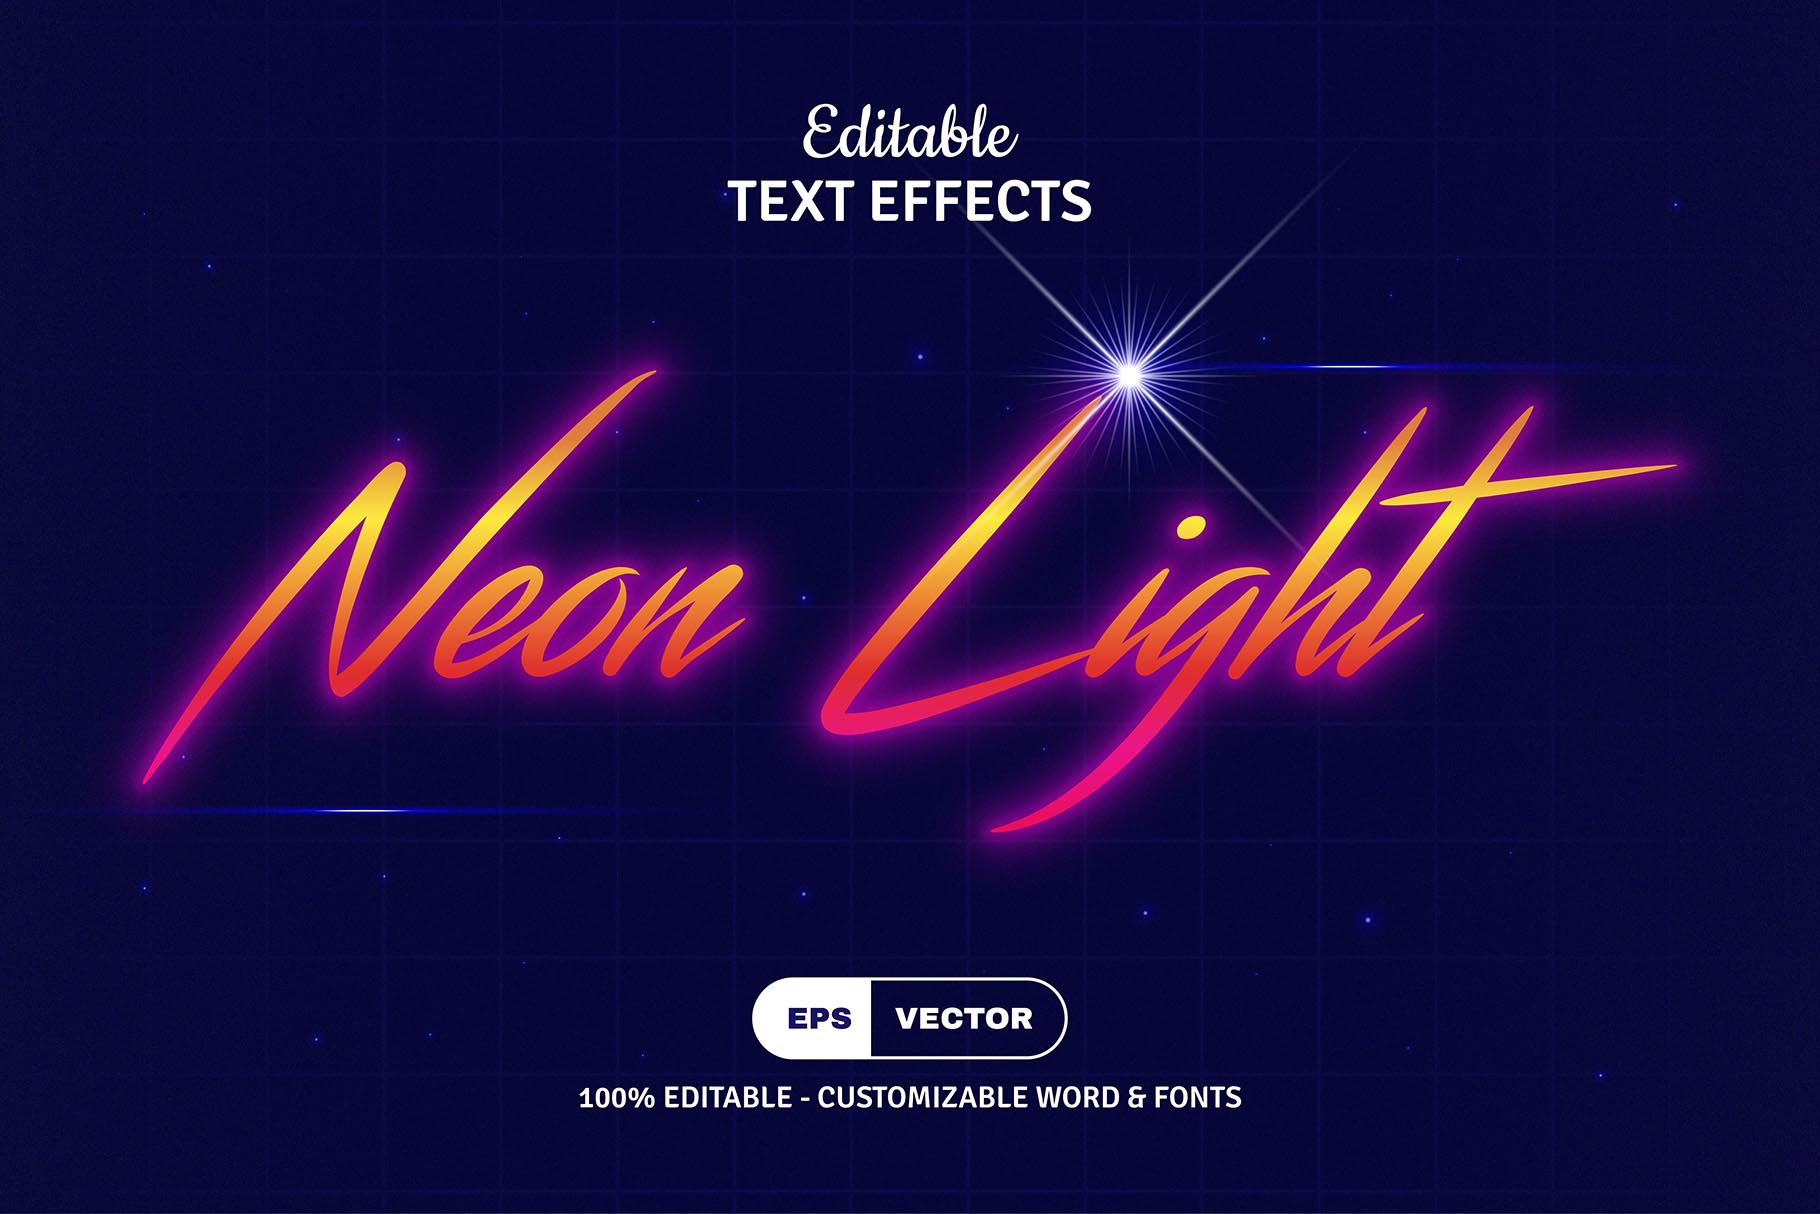 80s text effects 09 5